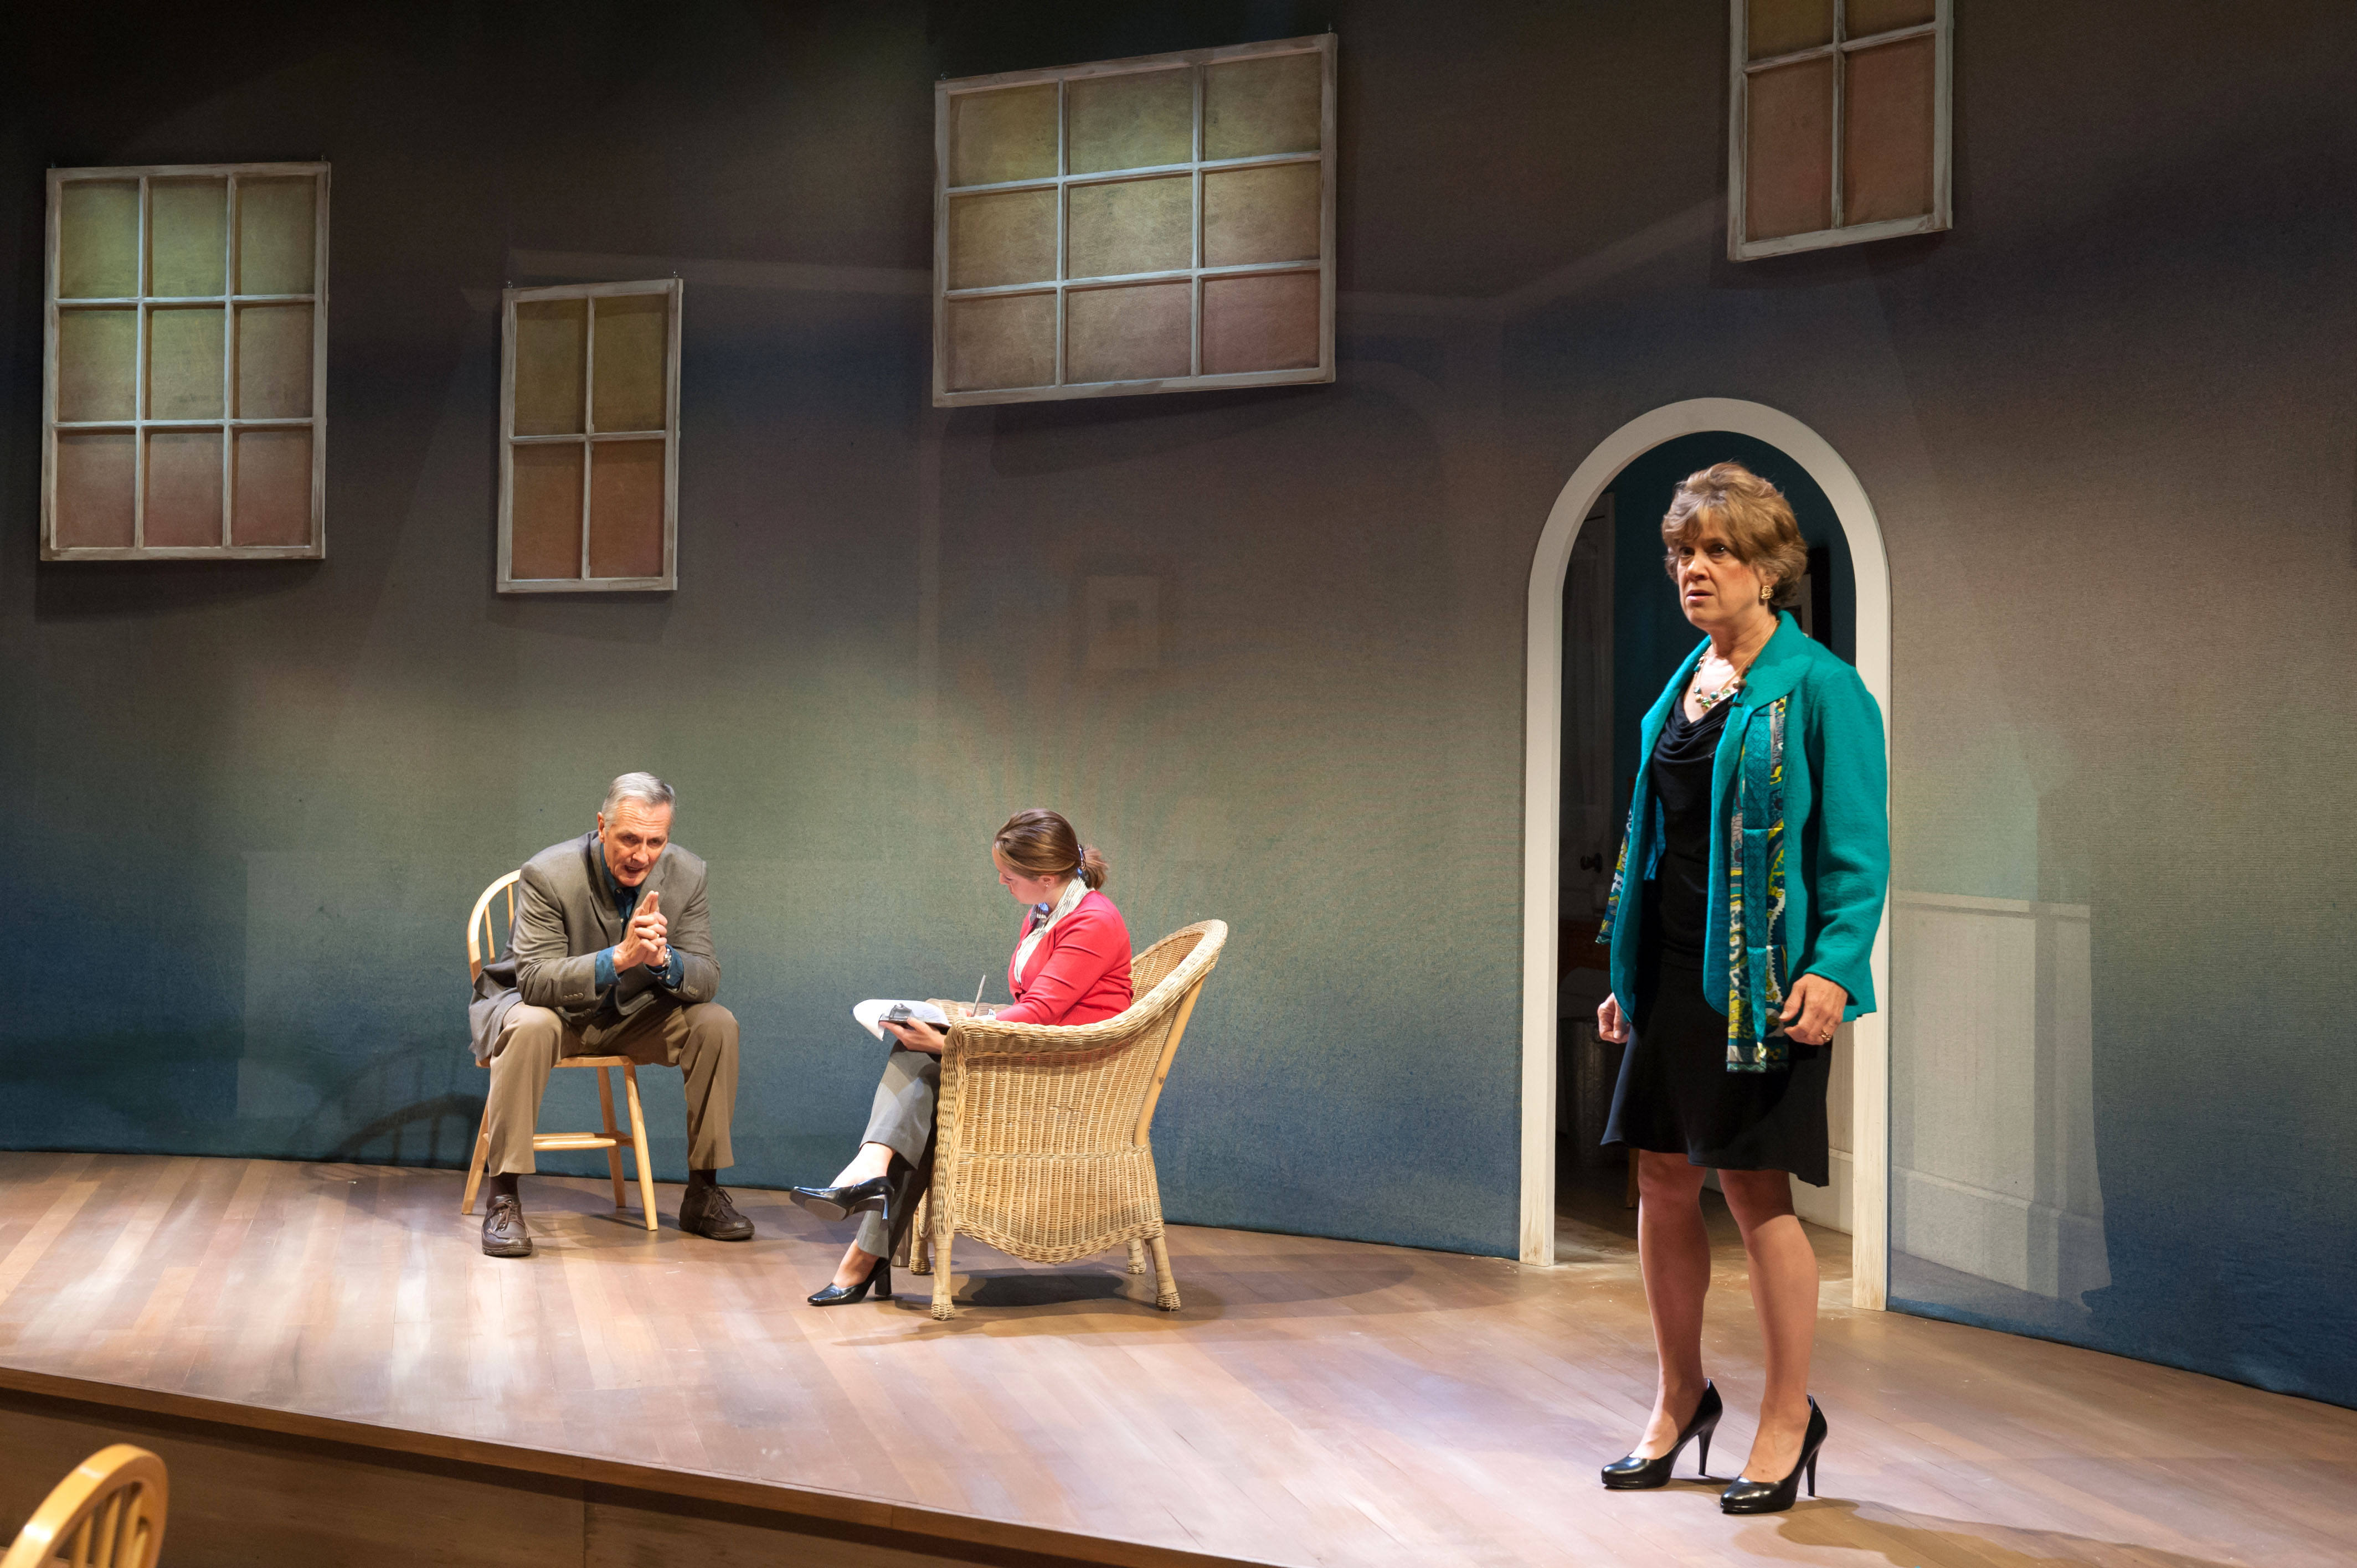 David DeBeck, Angie Jepson, and Debra Wise in Sharr White's THE OTHER PLACE. Produced by The Nora Theatre Company and Underground Railway Theater. Photo: A.R. Sinclair Photography.